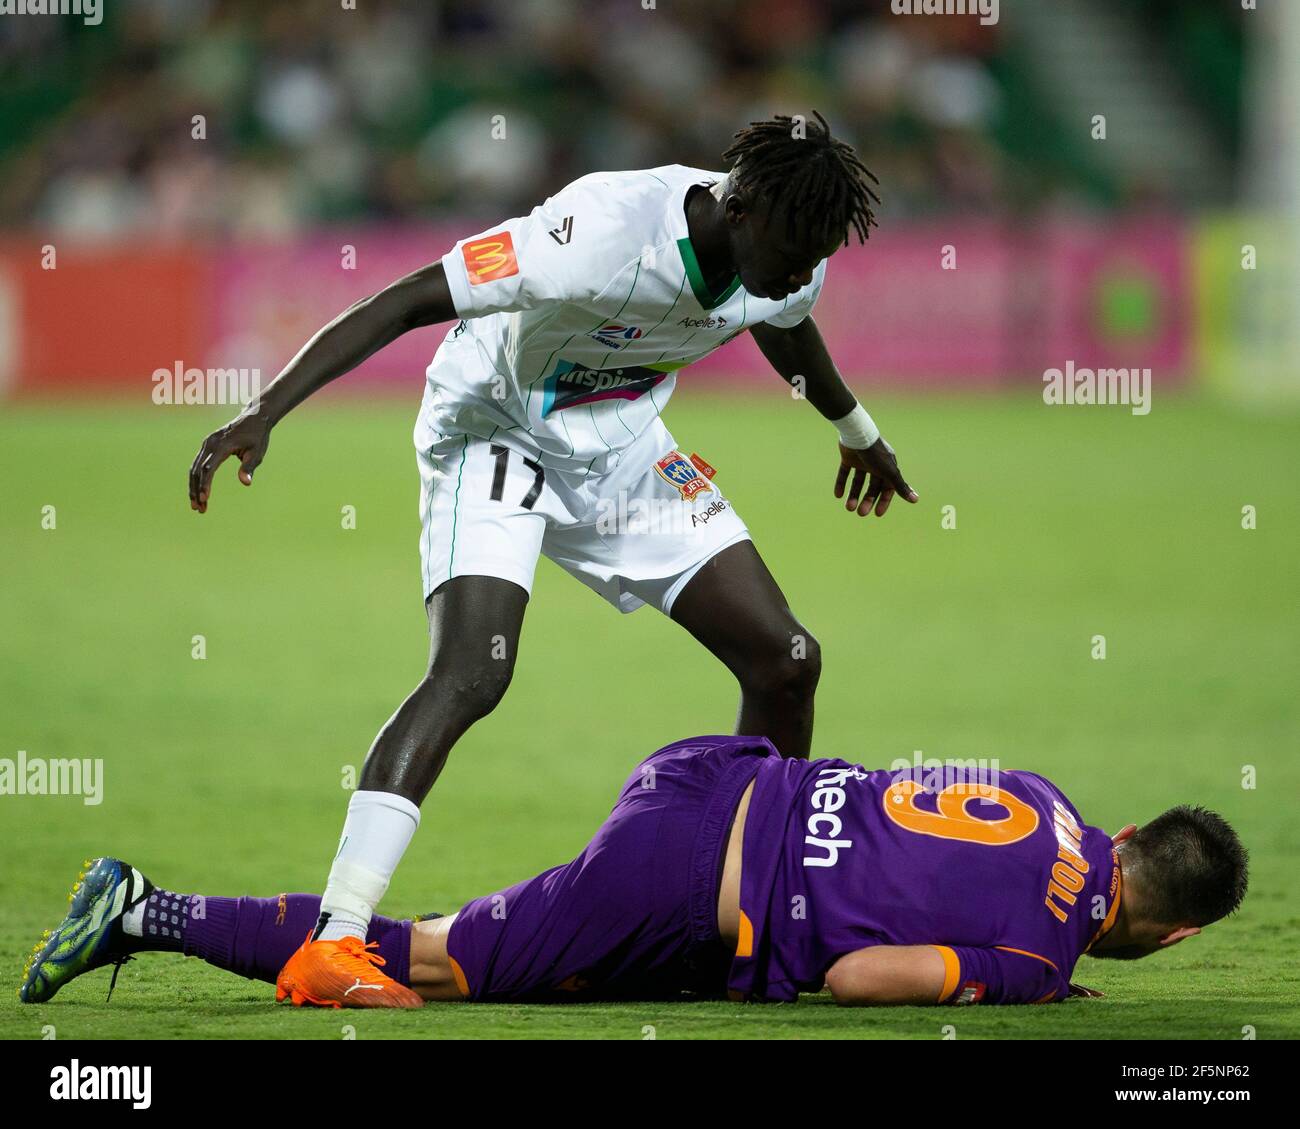 27th March 2021; HBF Park, Perth, Western Australia, Australia; A League Football, Perth Glory versus Newcastle Jets; Kuach Yuel of the Newcastle Jets stands over Bruno Fornaroli Mezza of the Perth Glory after he fouled him in a tackle Stock Photo